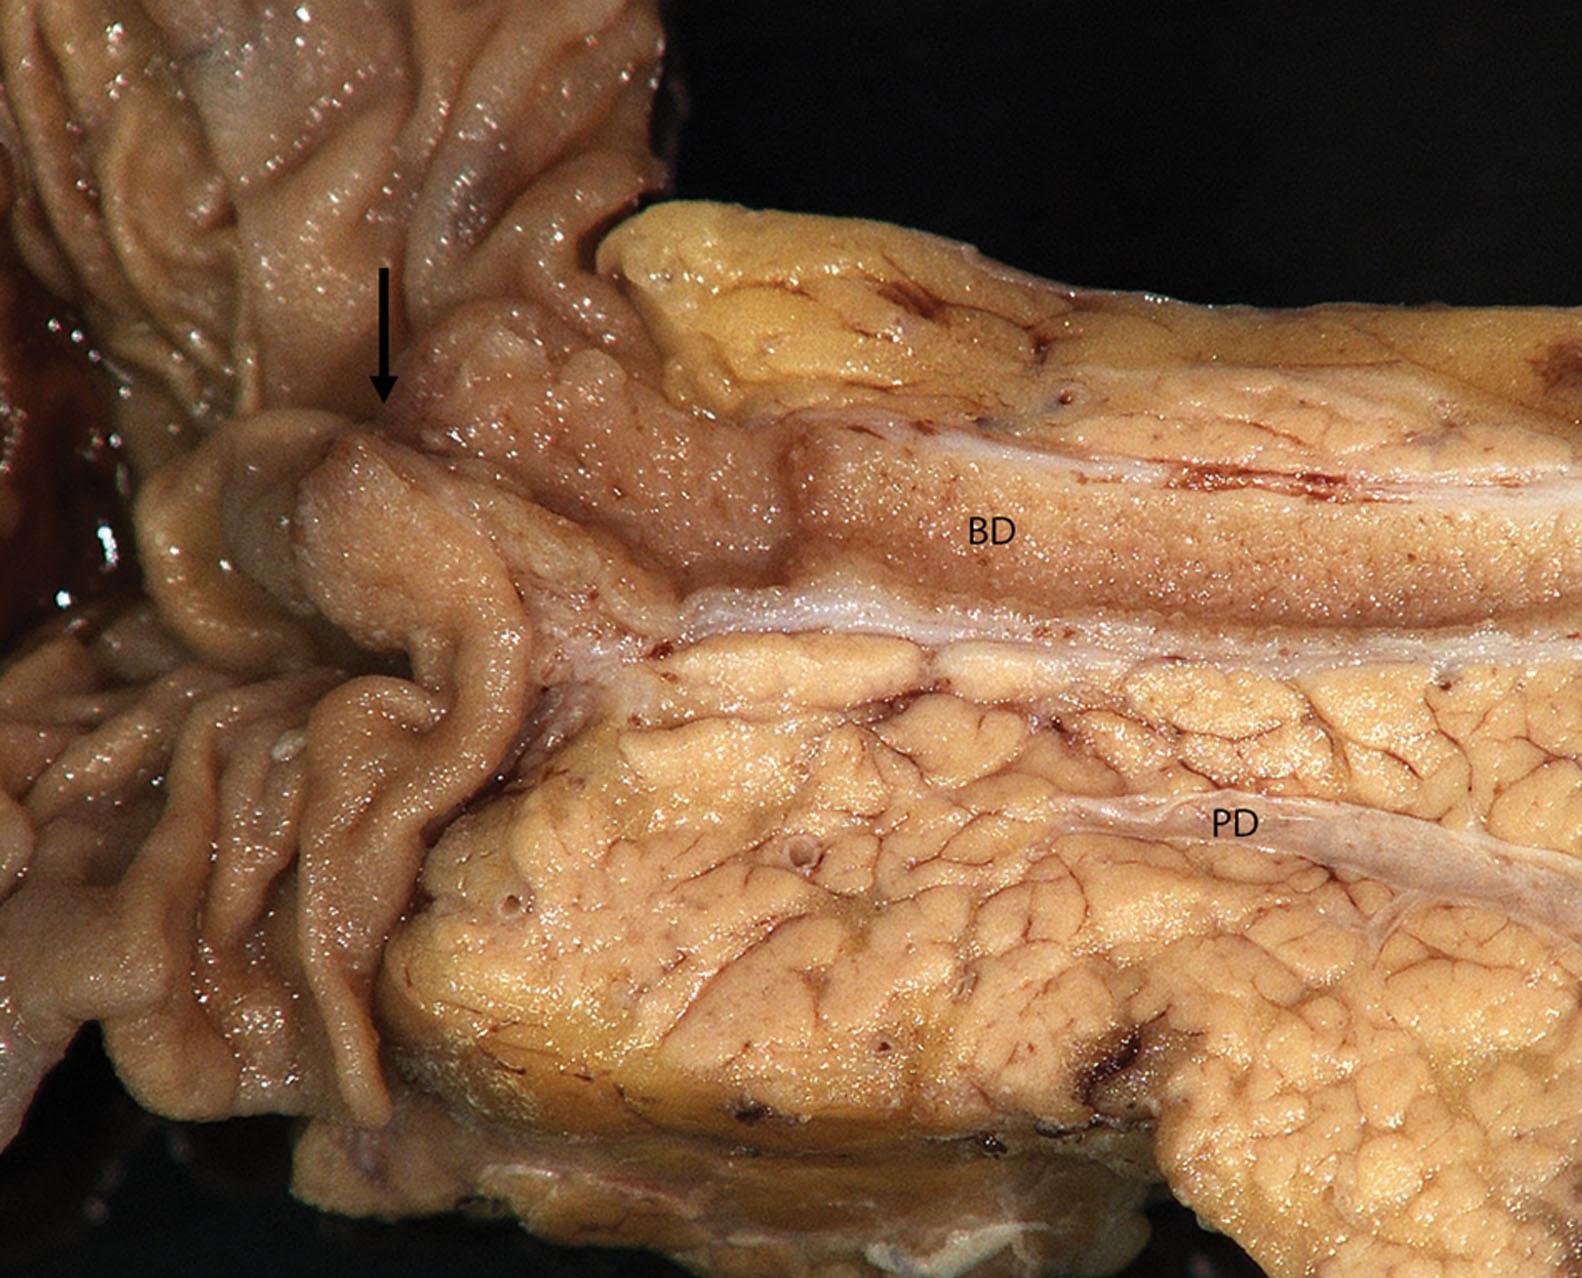 Figure 6.14, Gross appearance of an ampullary adenocarcinoma, not otherwise specified, with tumor centered on the papilla of Vater (black arrow) associated with a dilated common bile duct (BD) and pancreatic duct (PD).